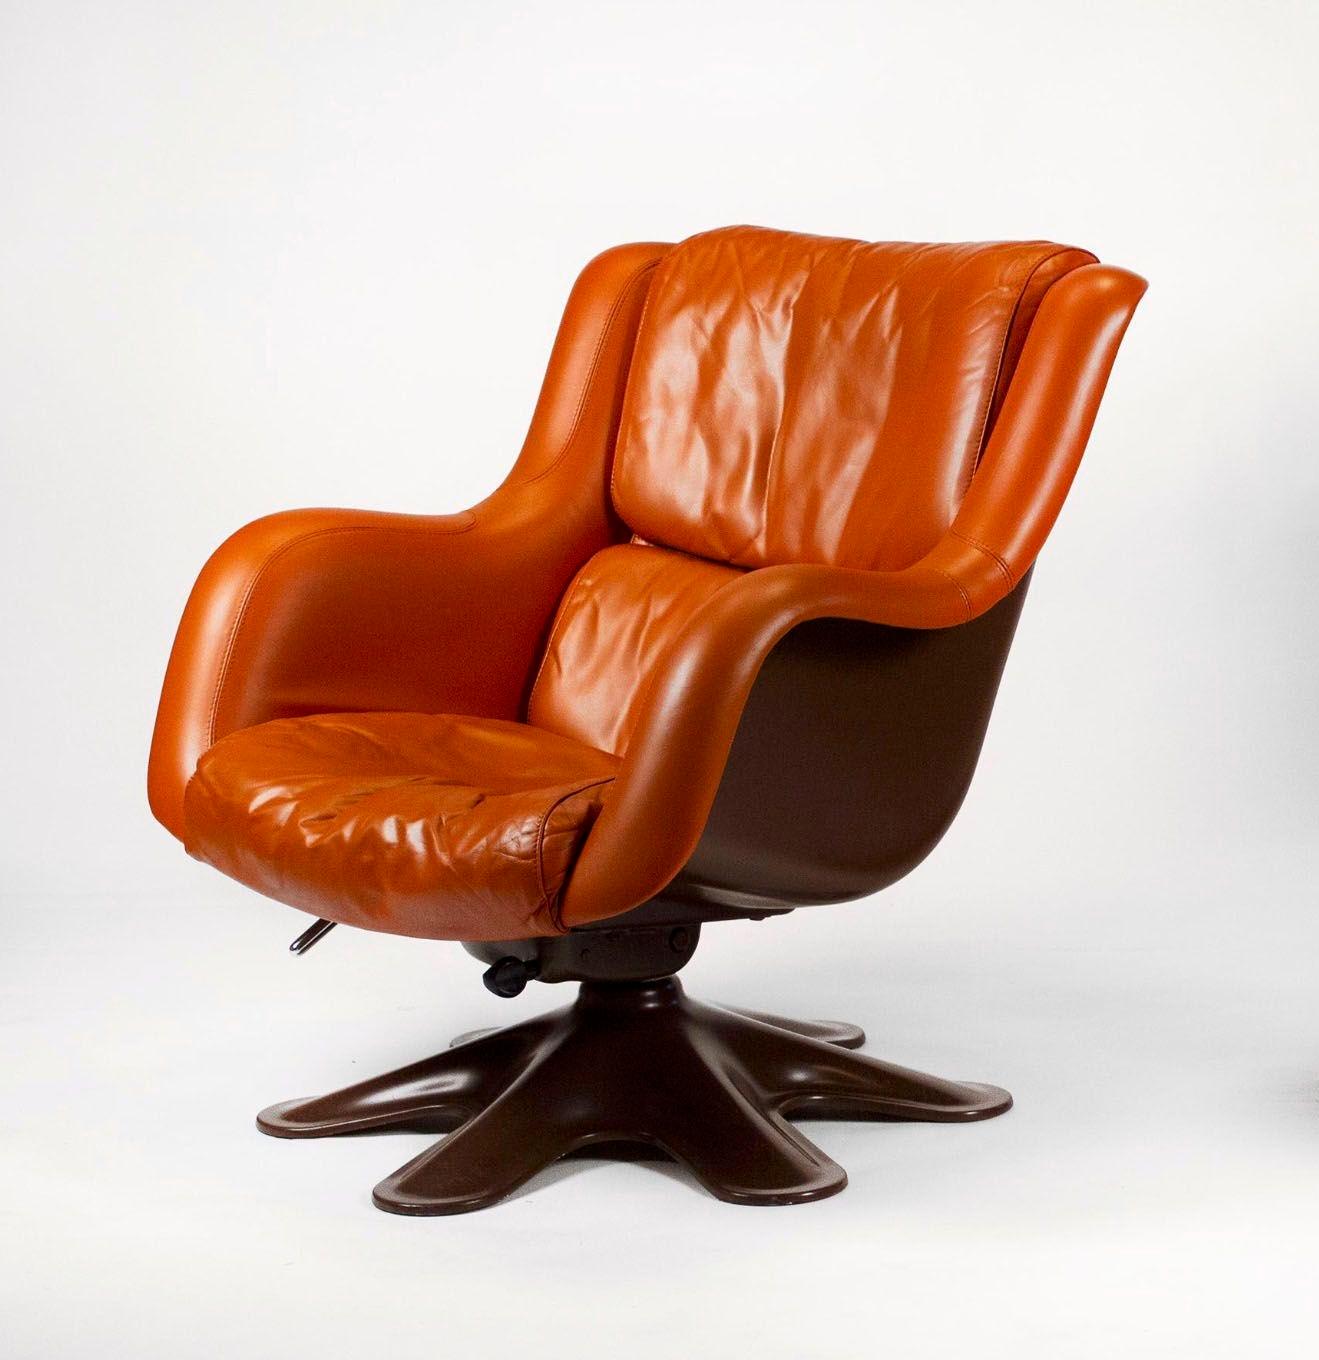 Karuselli tilt and swivel lounge chair by Yrjo Kukkapuro for Haimi of Finland in original terracotta leather with a chocolate brown fiberglass frame. This model 418 easy chair is considerably rare to the US market, especially in such a unique color